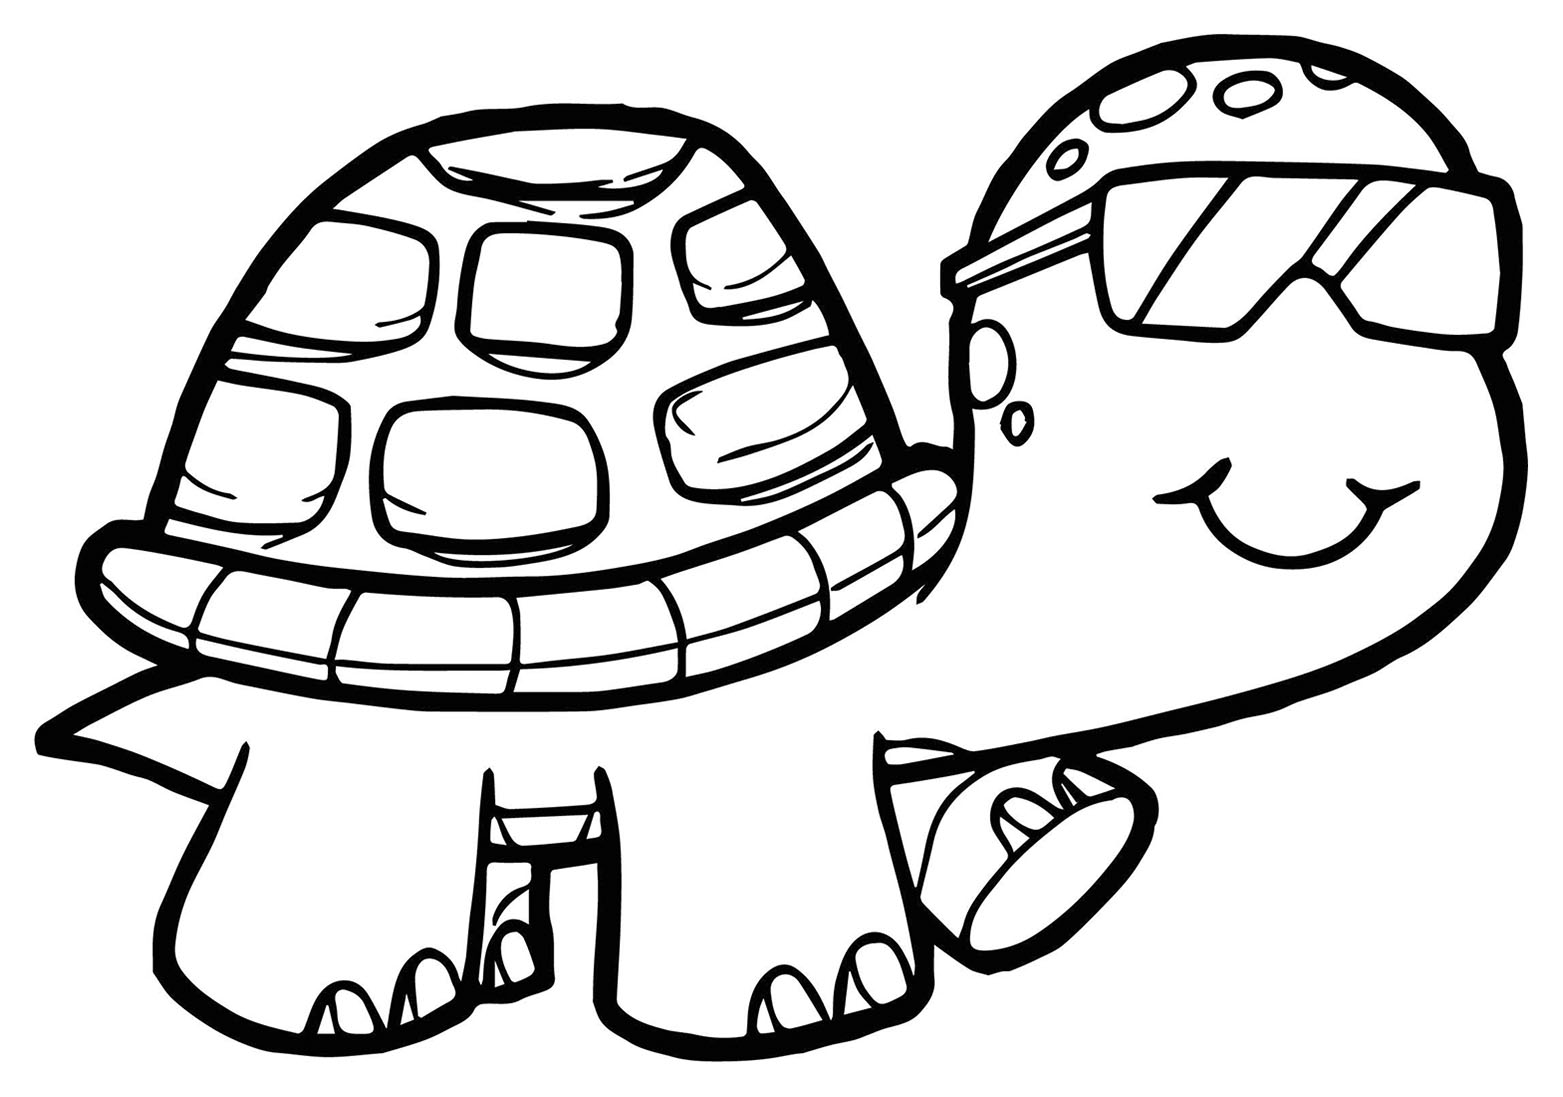 Turtles to print for free - Turtles Kids Coloring Pages